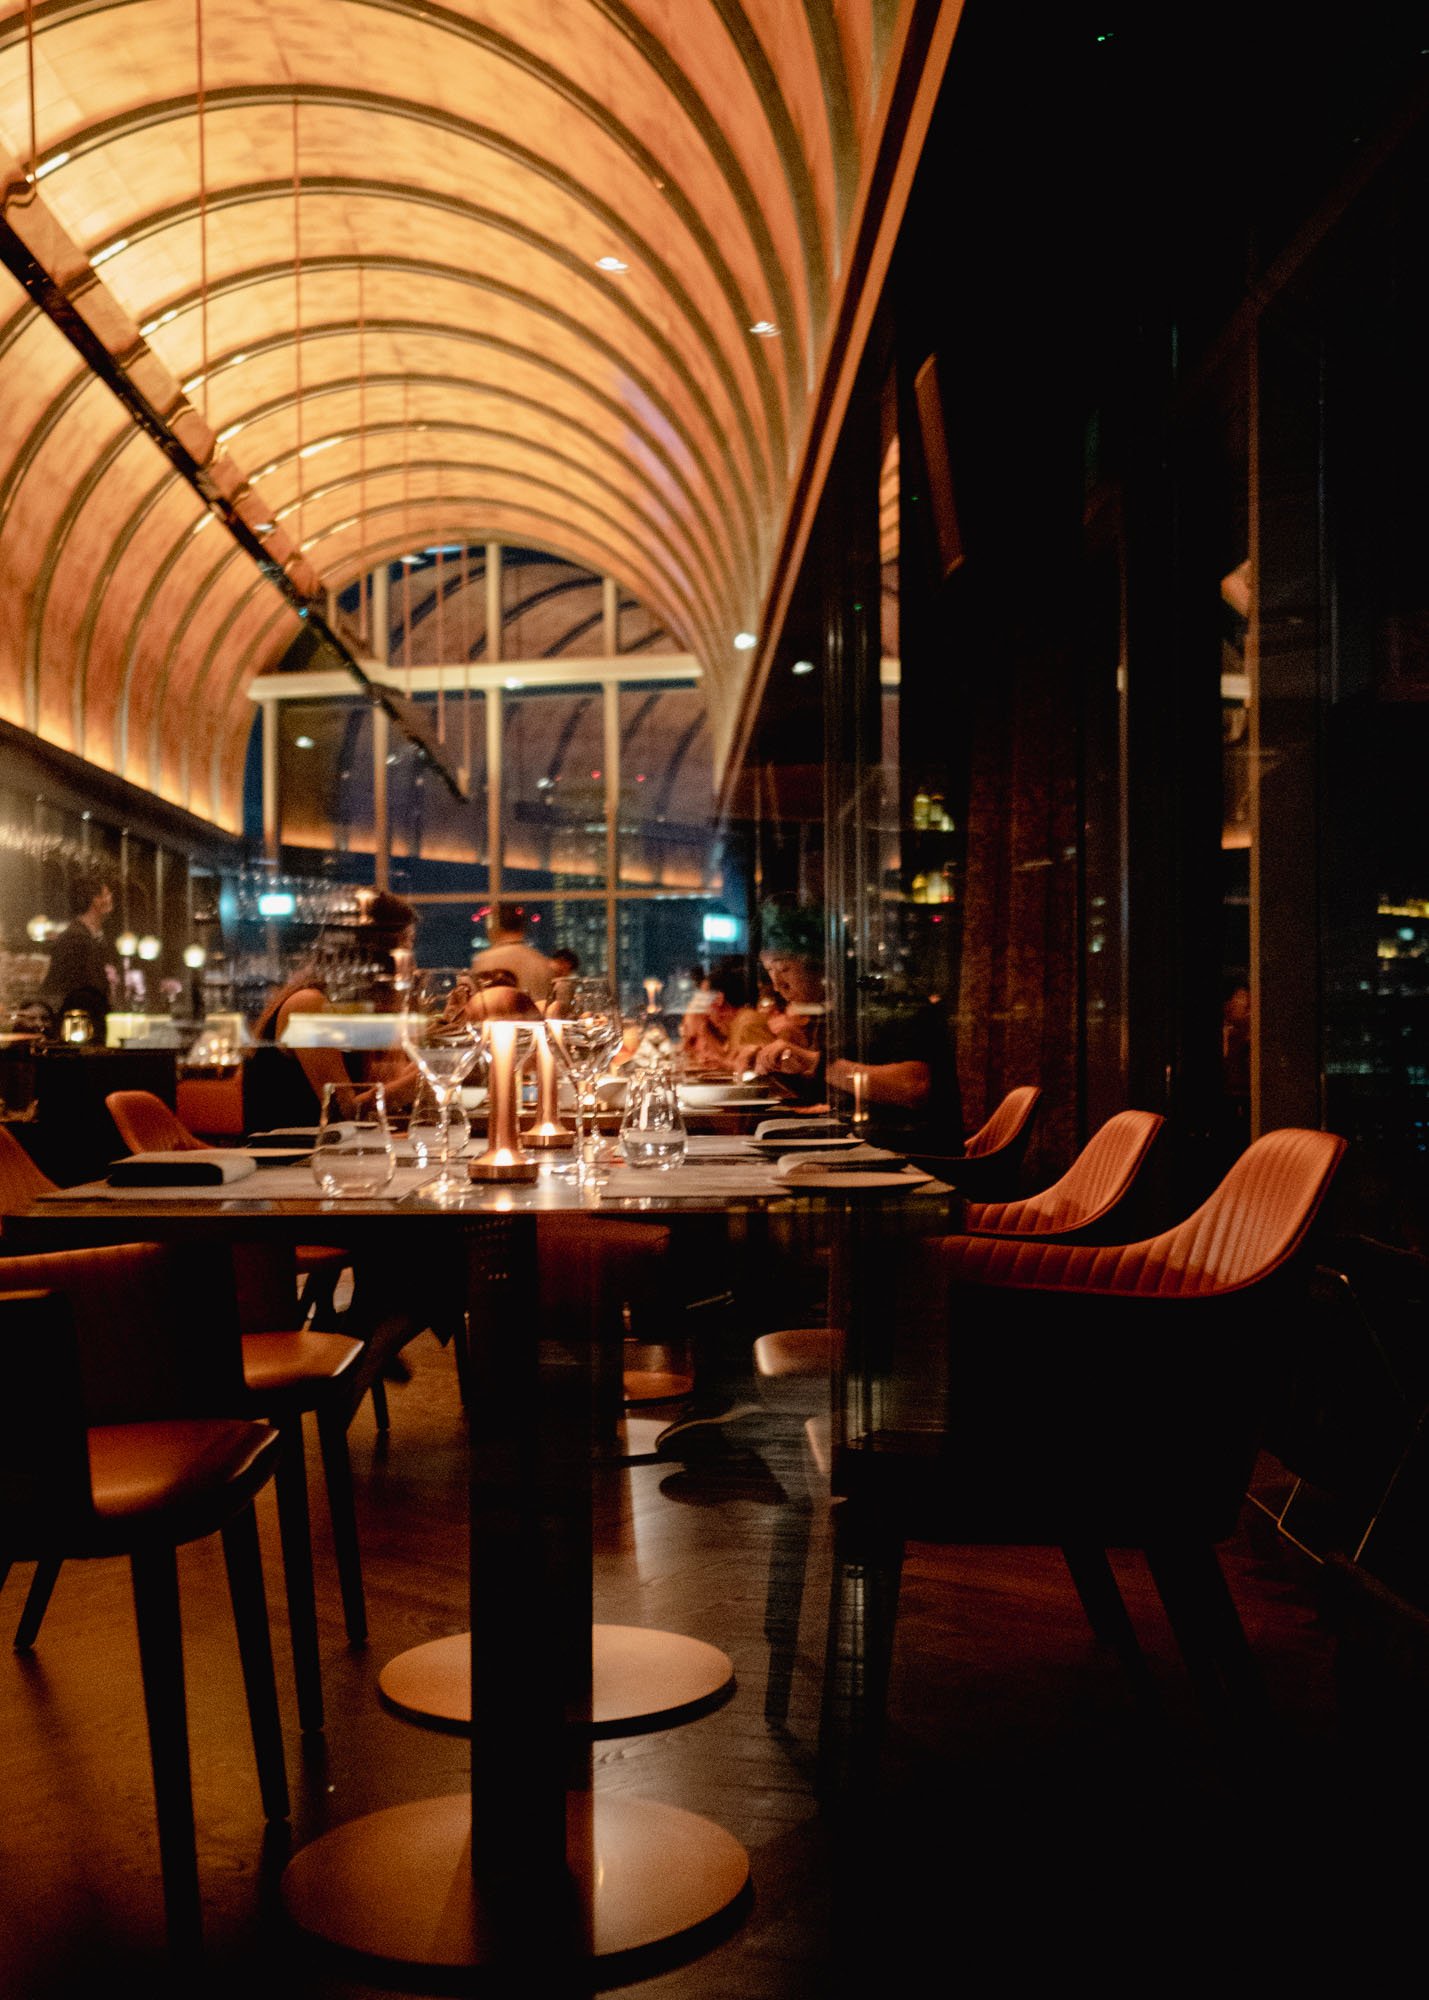 The Best Restaurants for a Date Night in Singapore